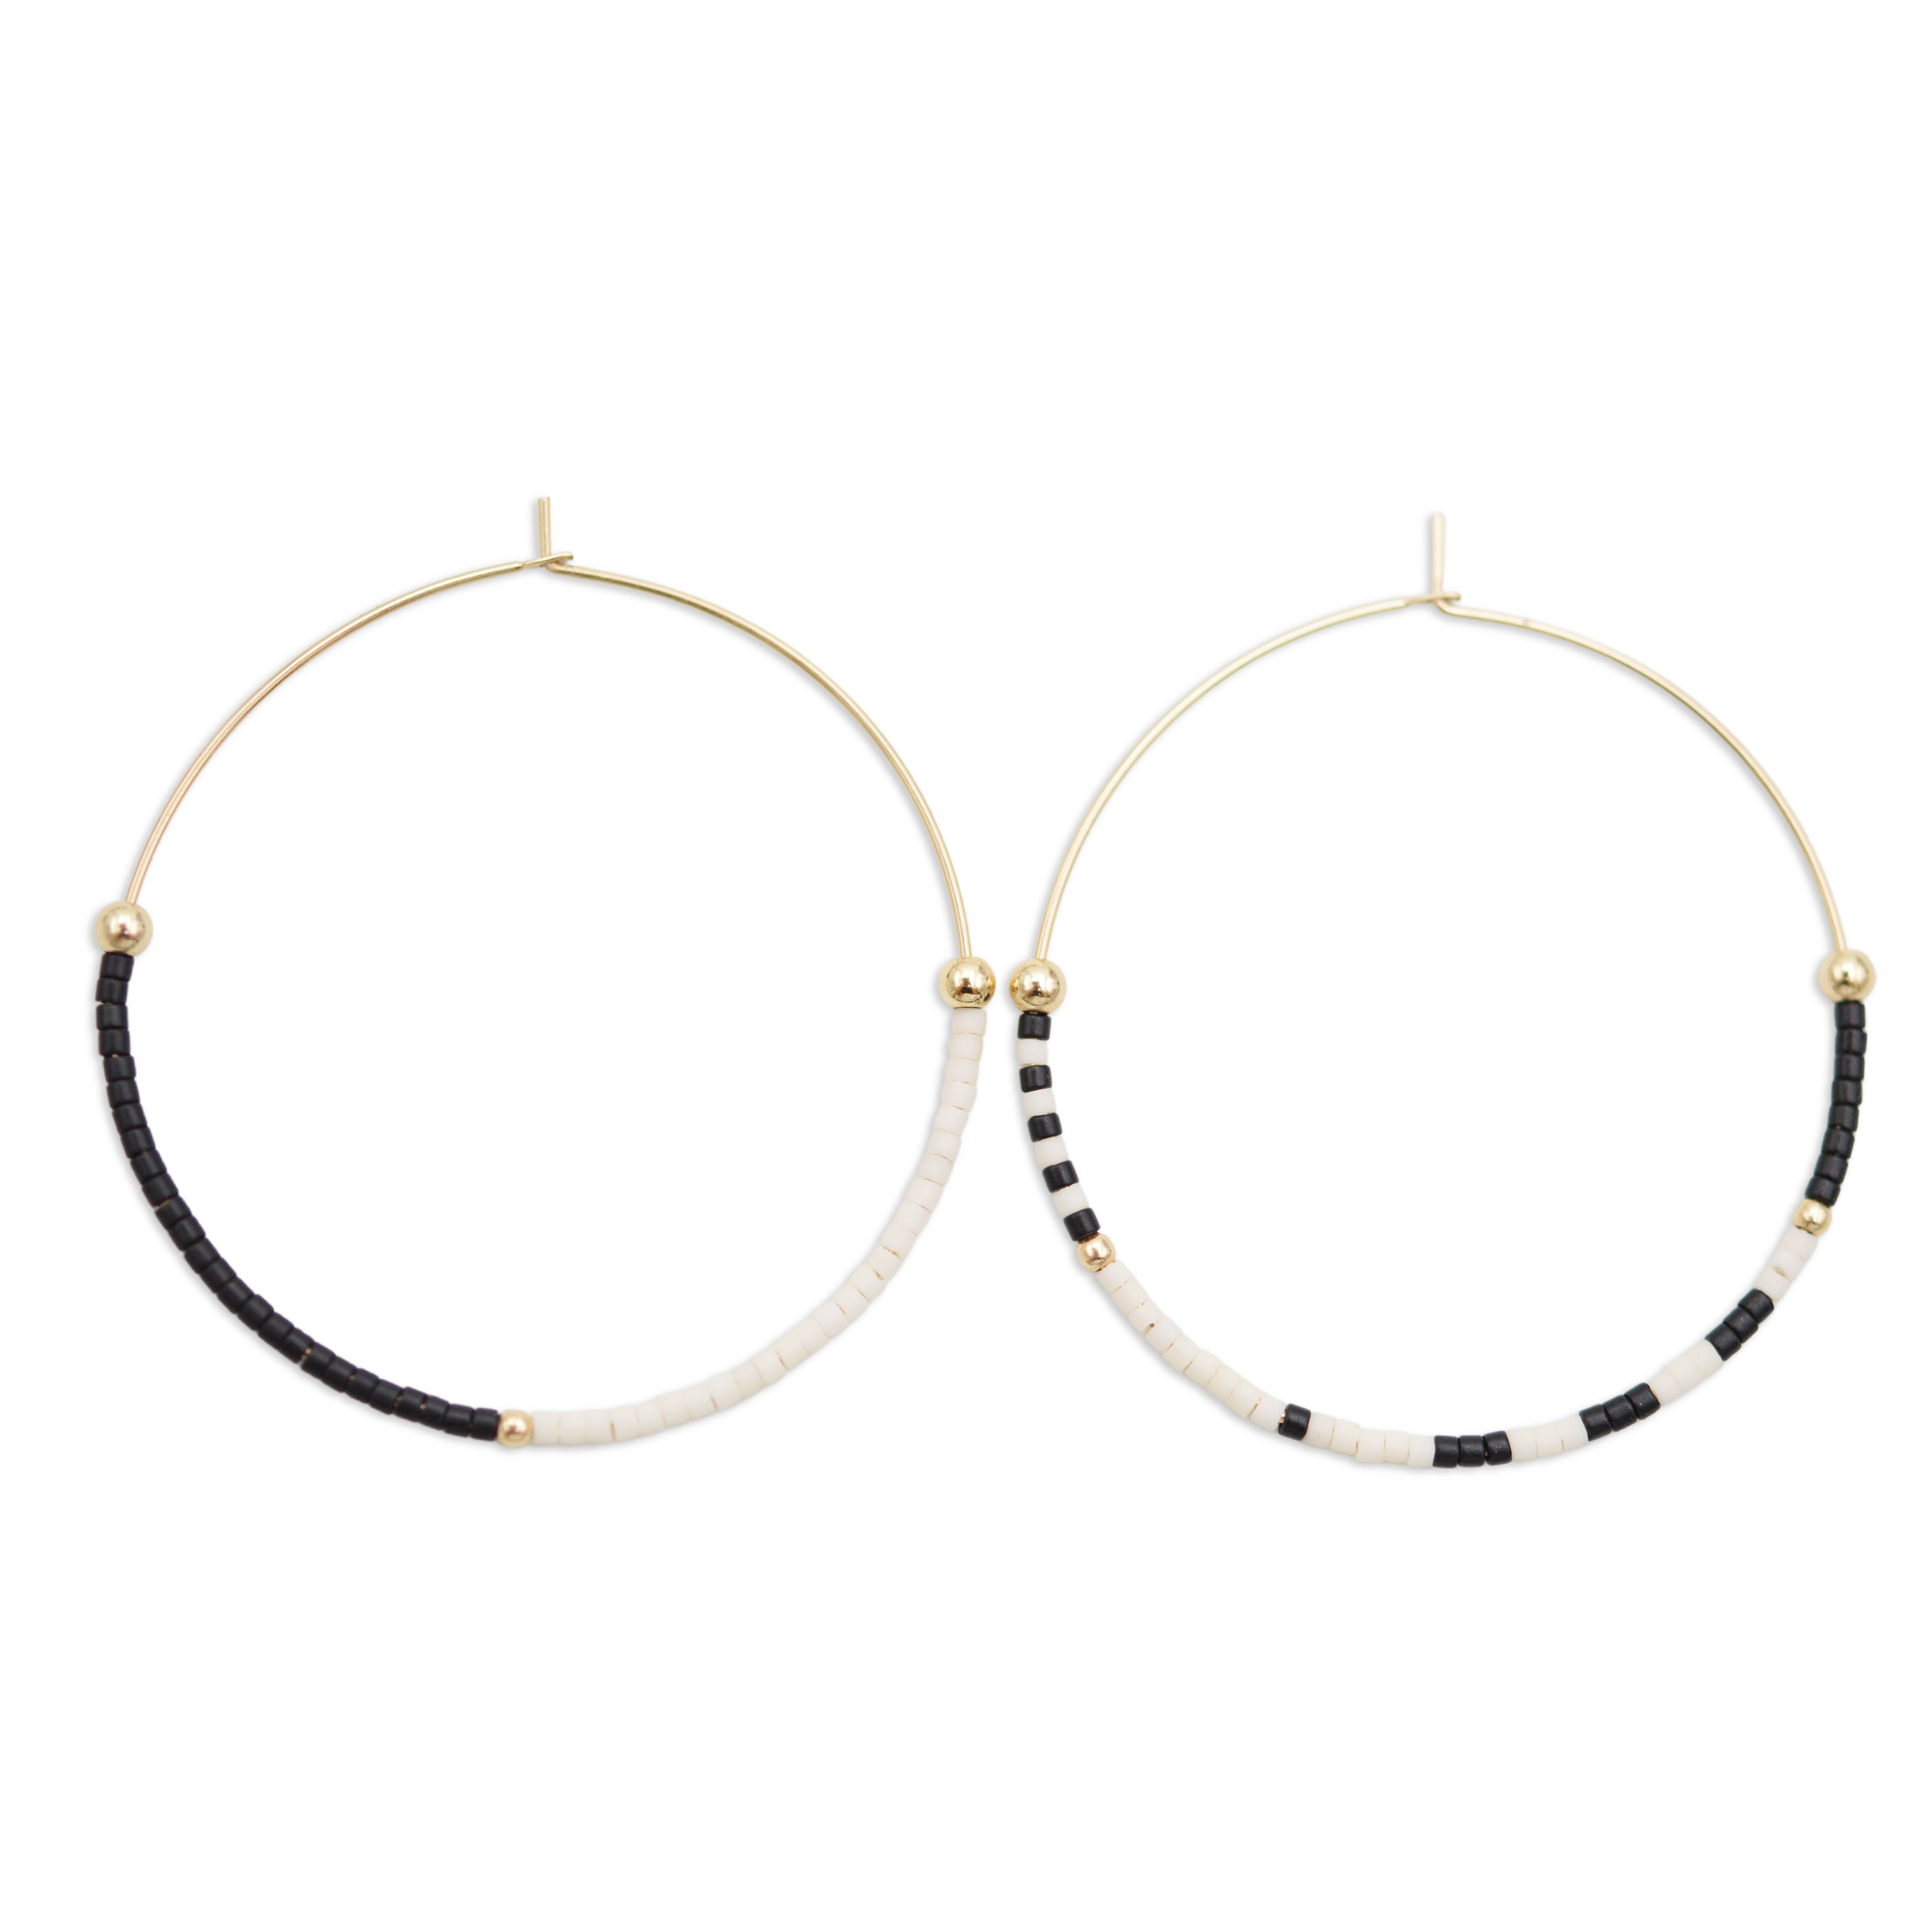 Black and White gold hoops